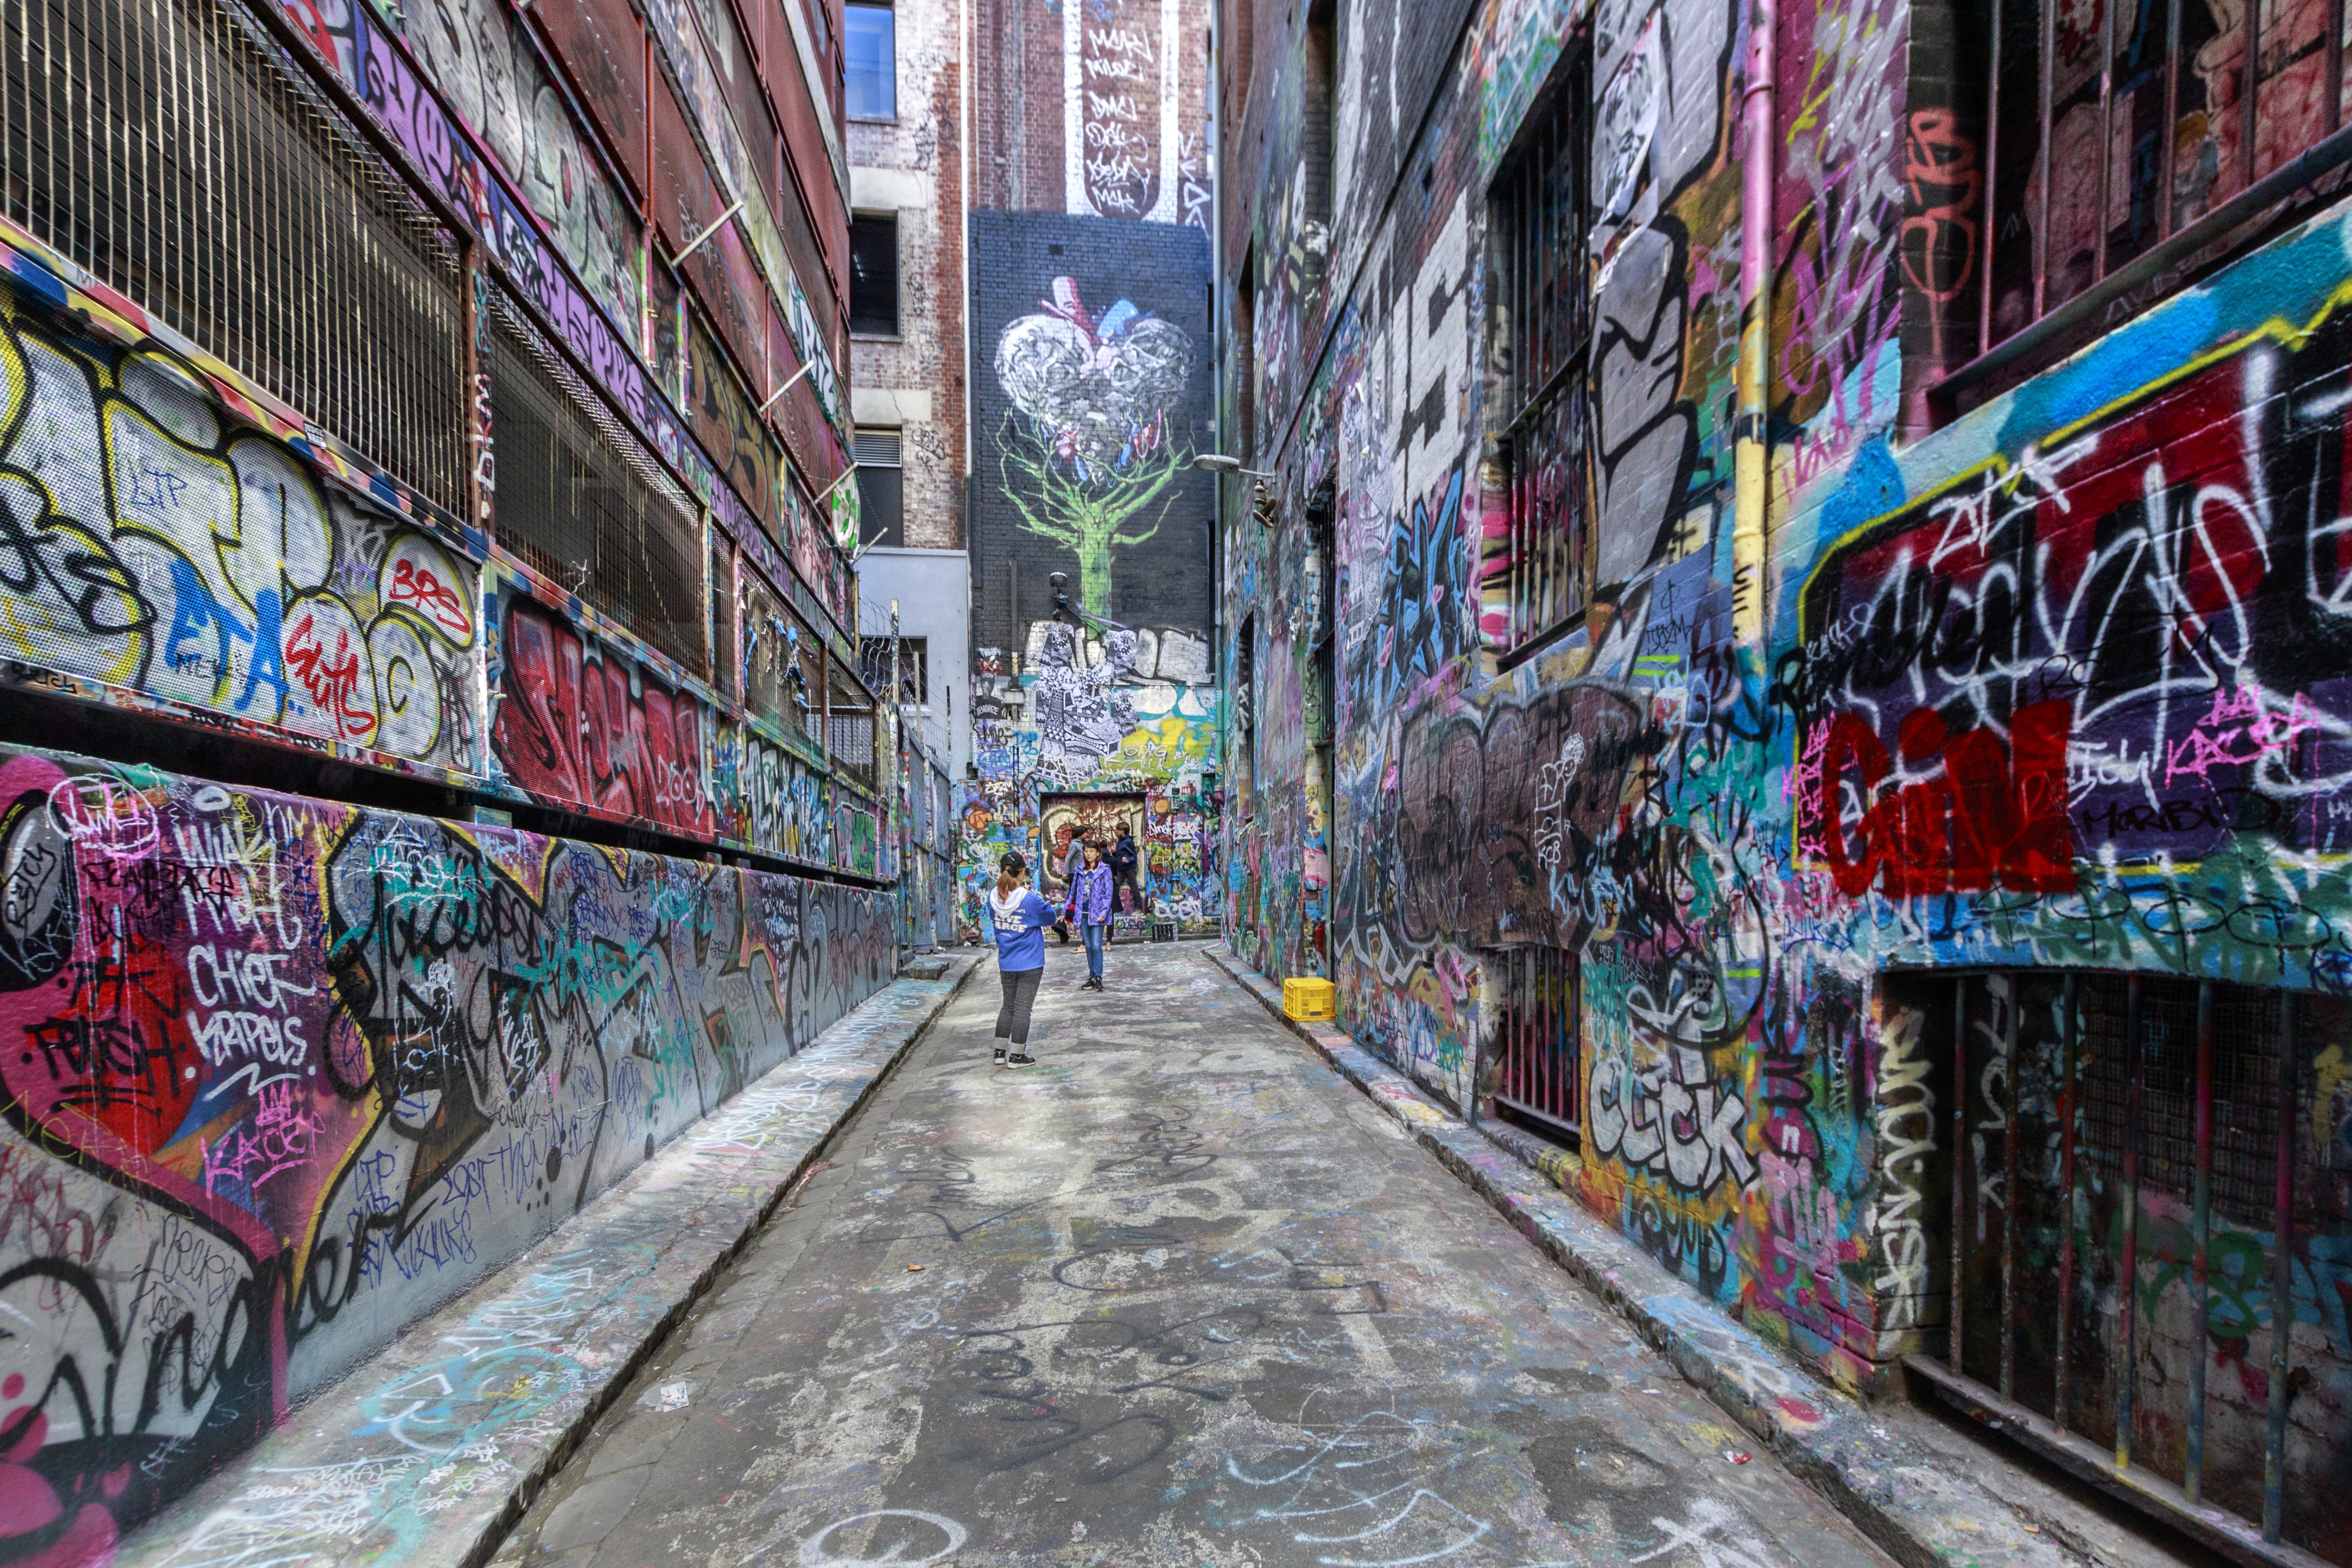 Melbourne’s Street Art Mecca Hosier Lane Is Also Home To A Very Spooky Ghost